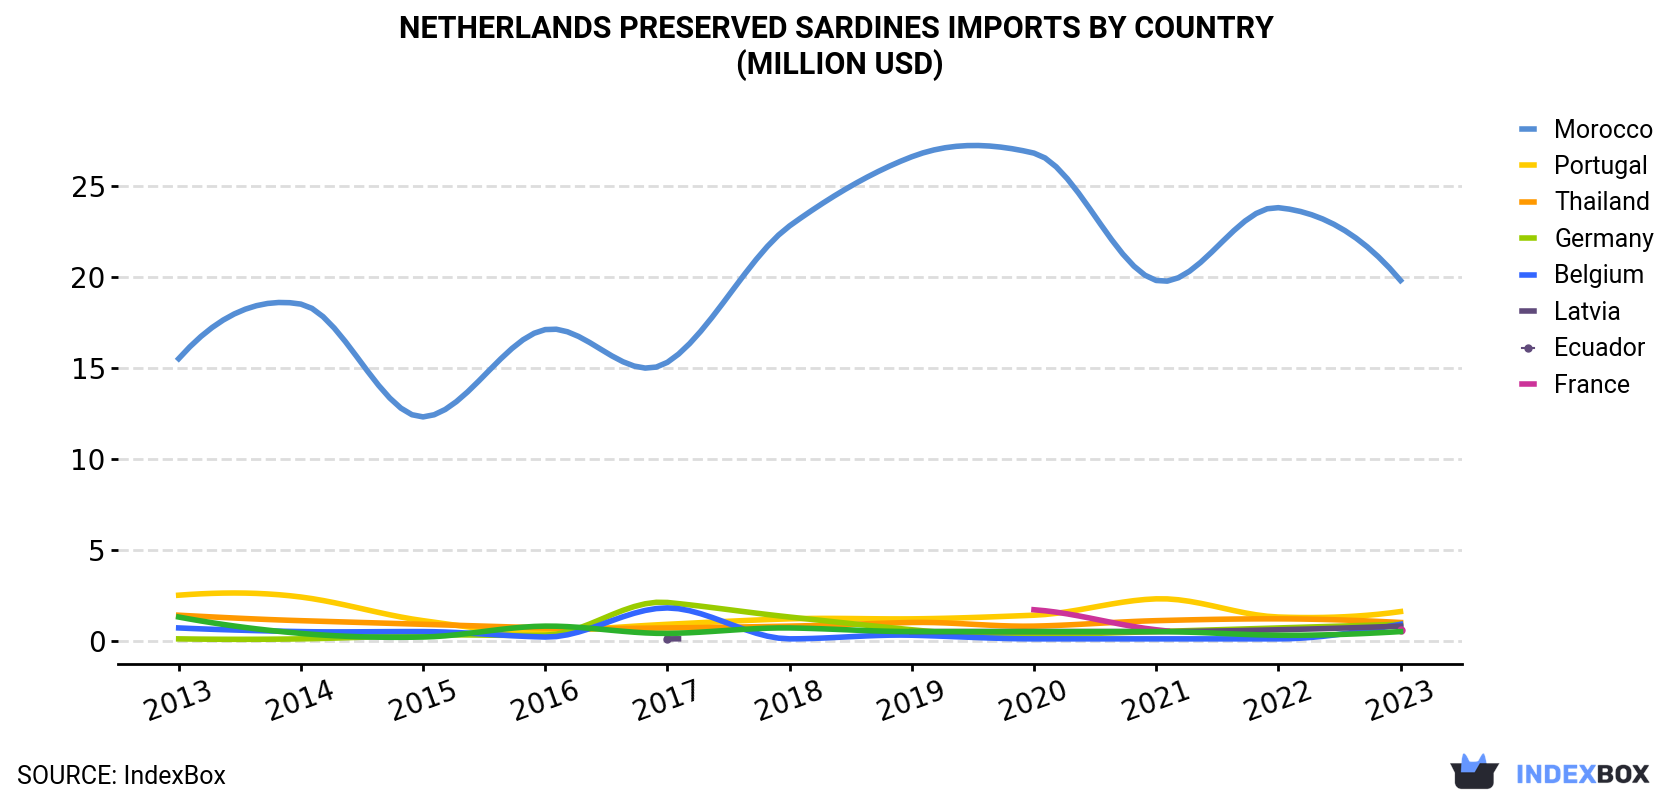 Netherlands Preserved Sardines Imports By Country (Million USD)